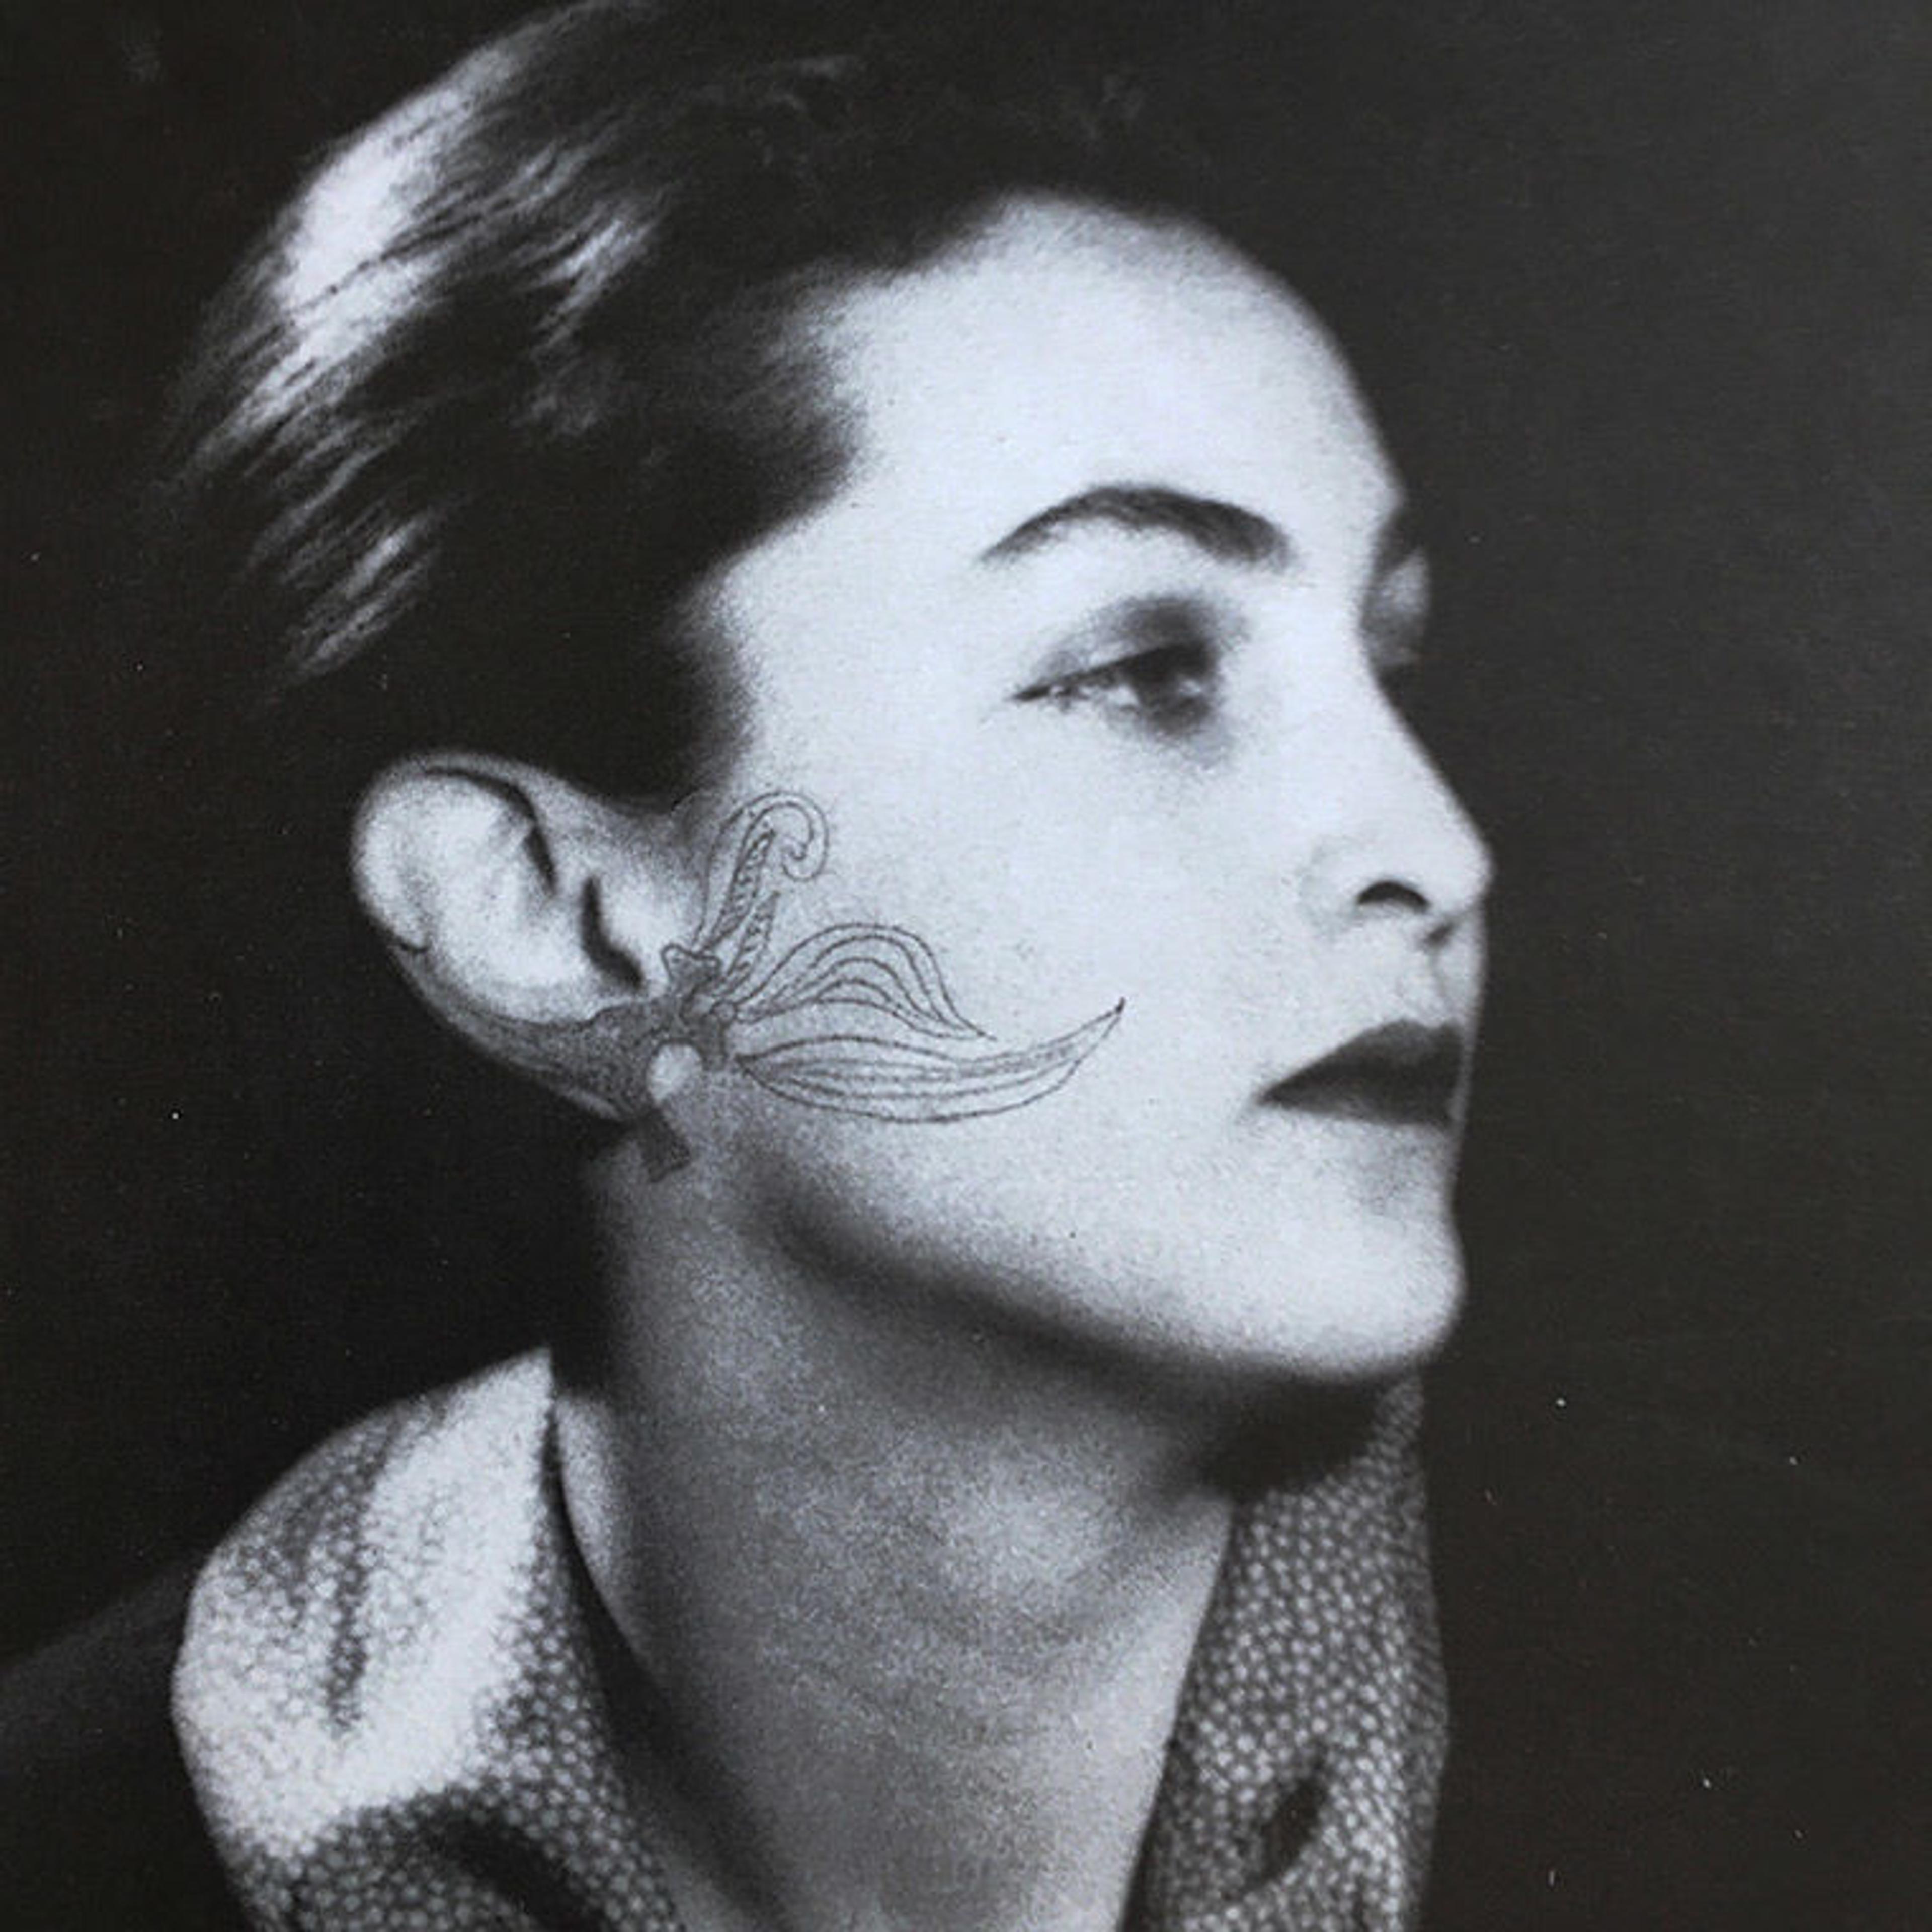 Man Ray photograph of Meret Oppenheim 